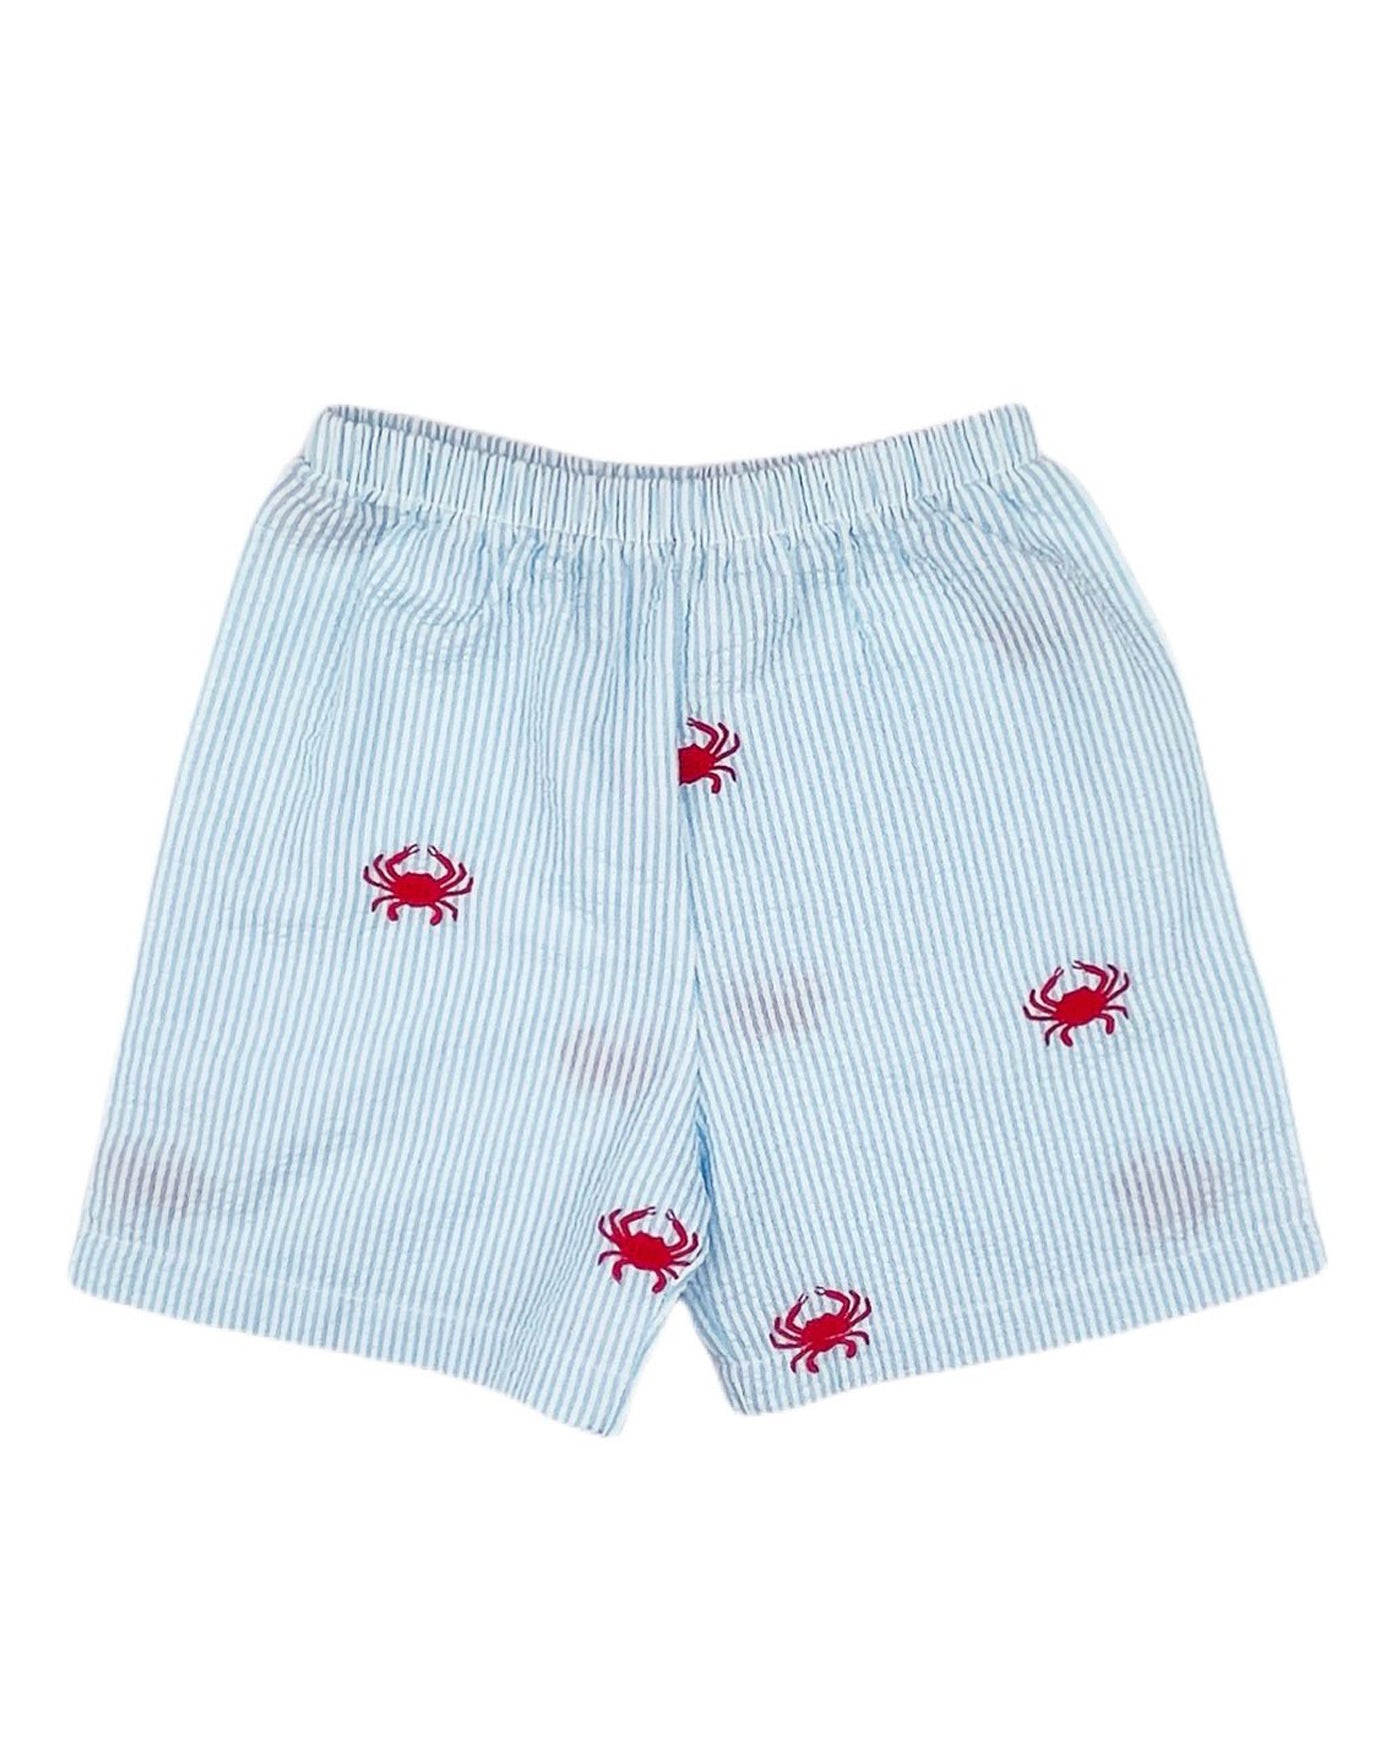 Turquoise Kids Seersucker Shorts with Red Embroidered Crabs